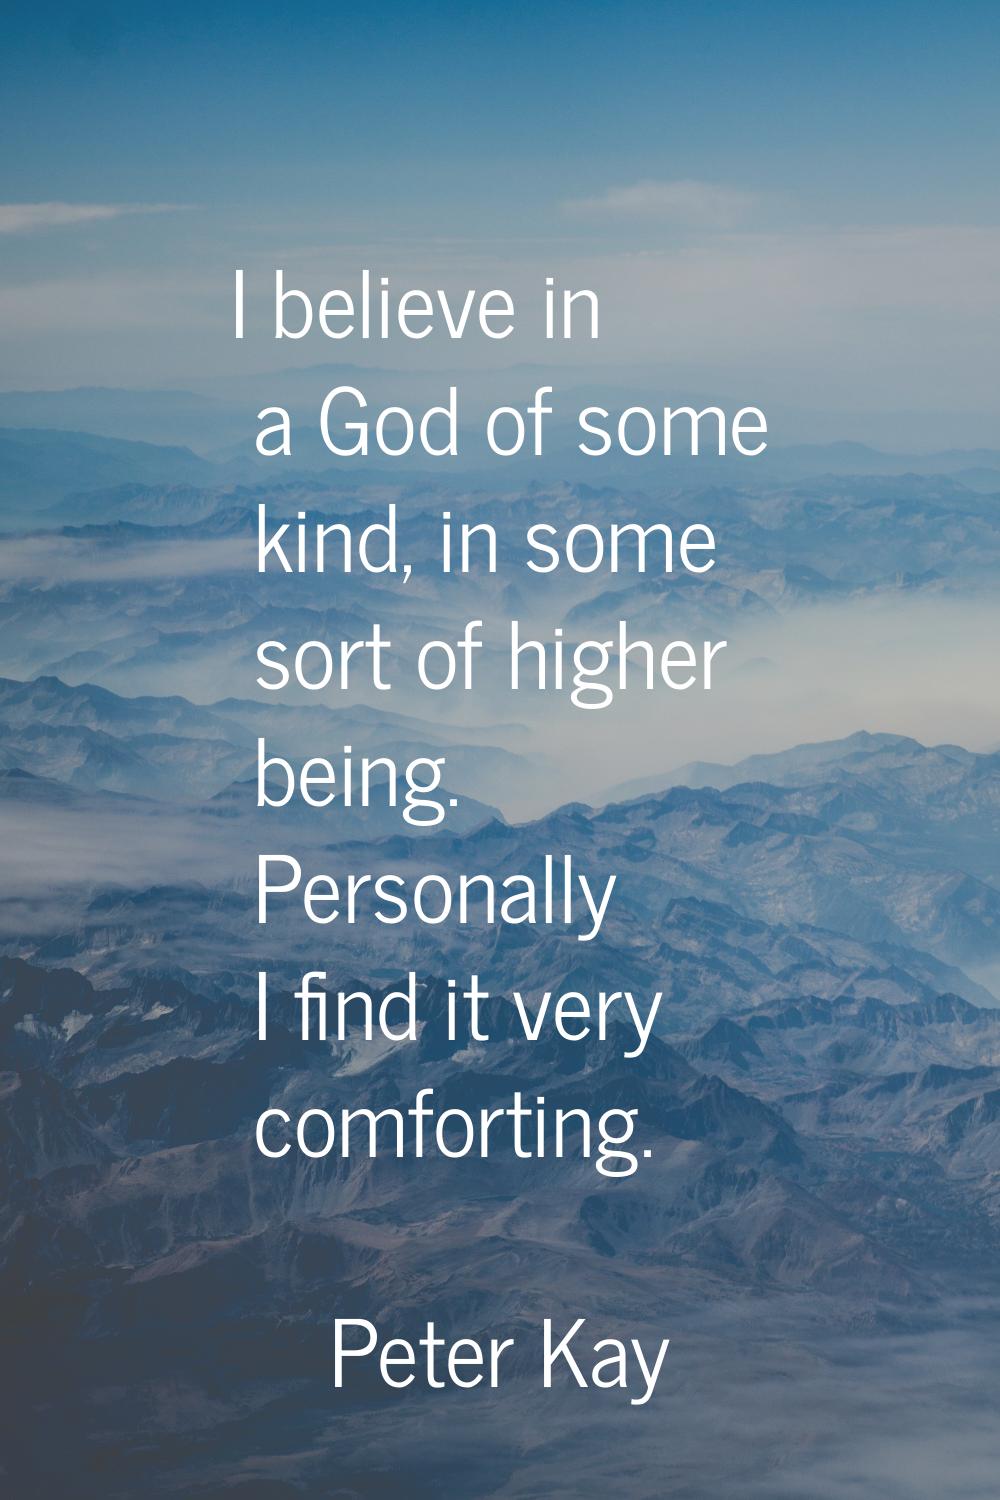 I believe in a God of some kind, in some sort of higher being. Personally I find it very comforting